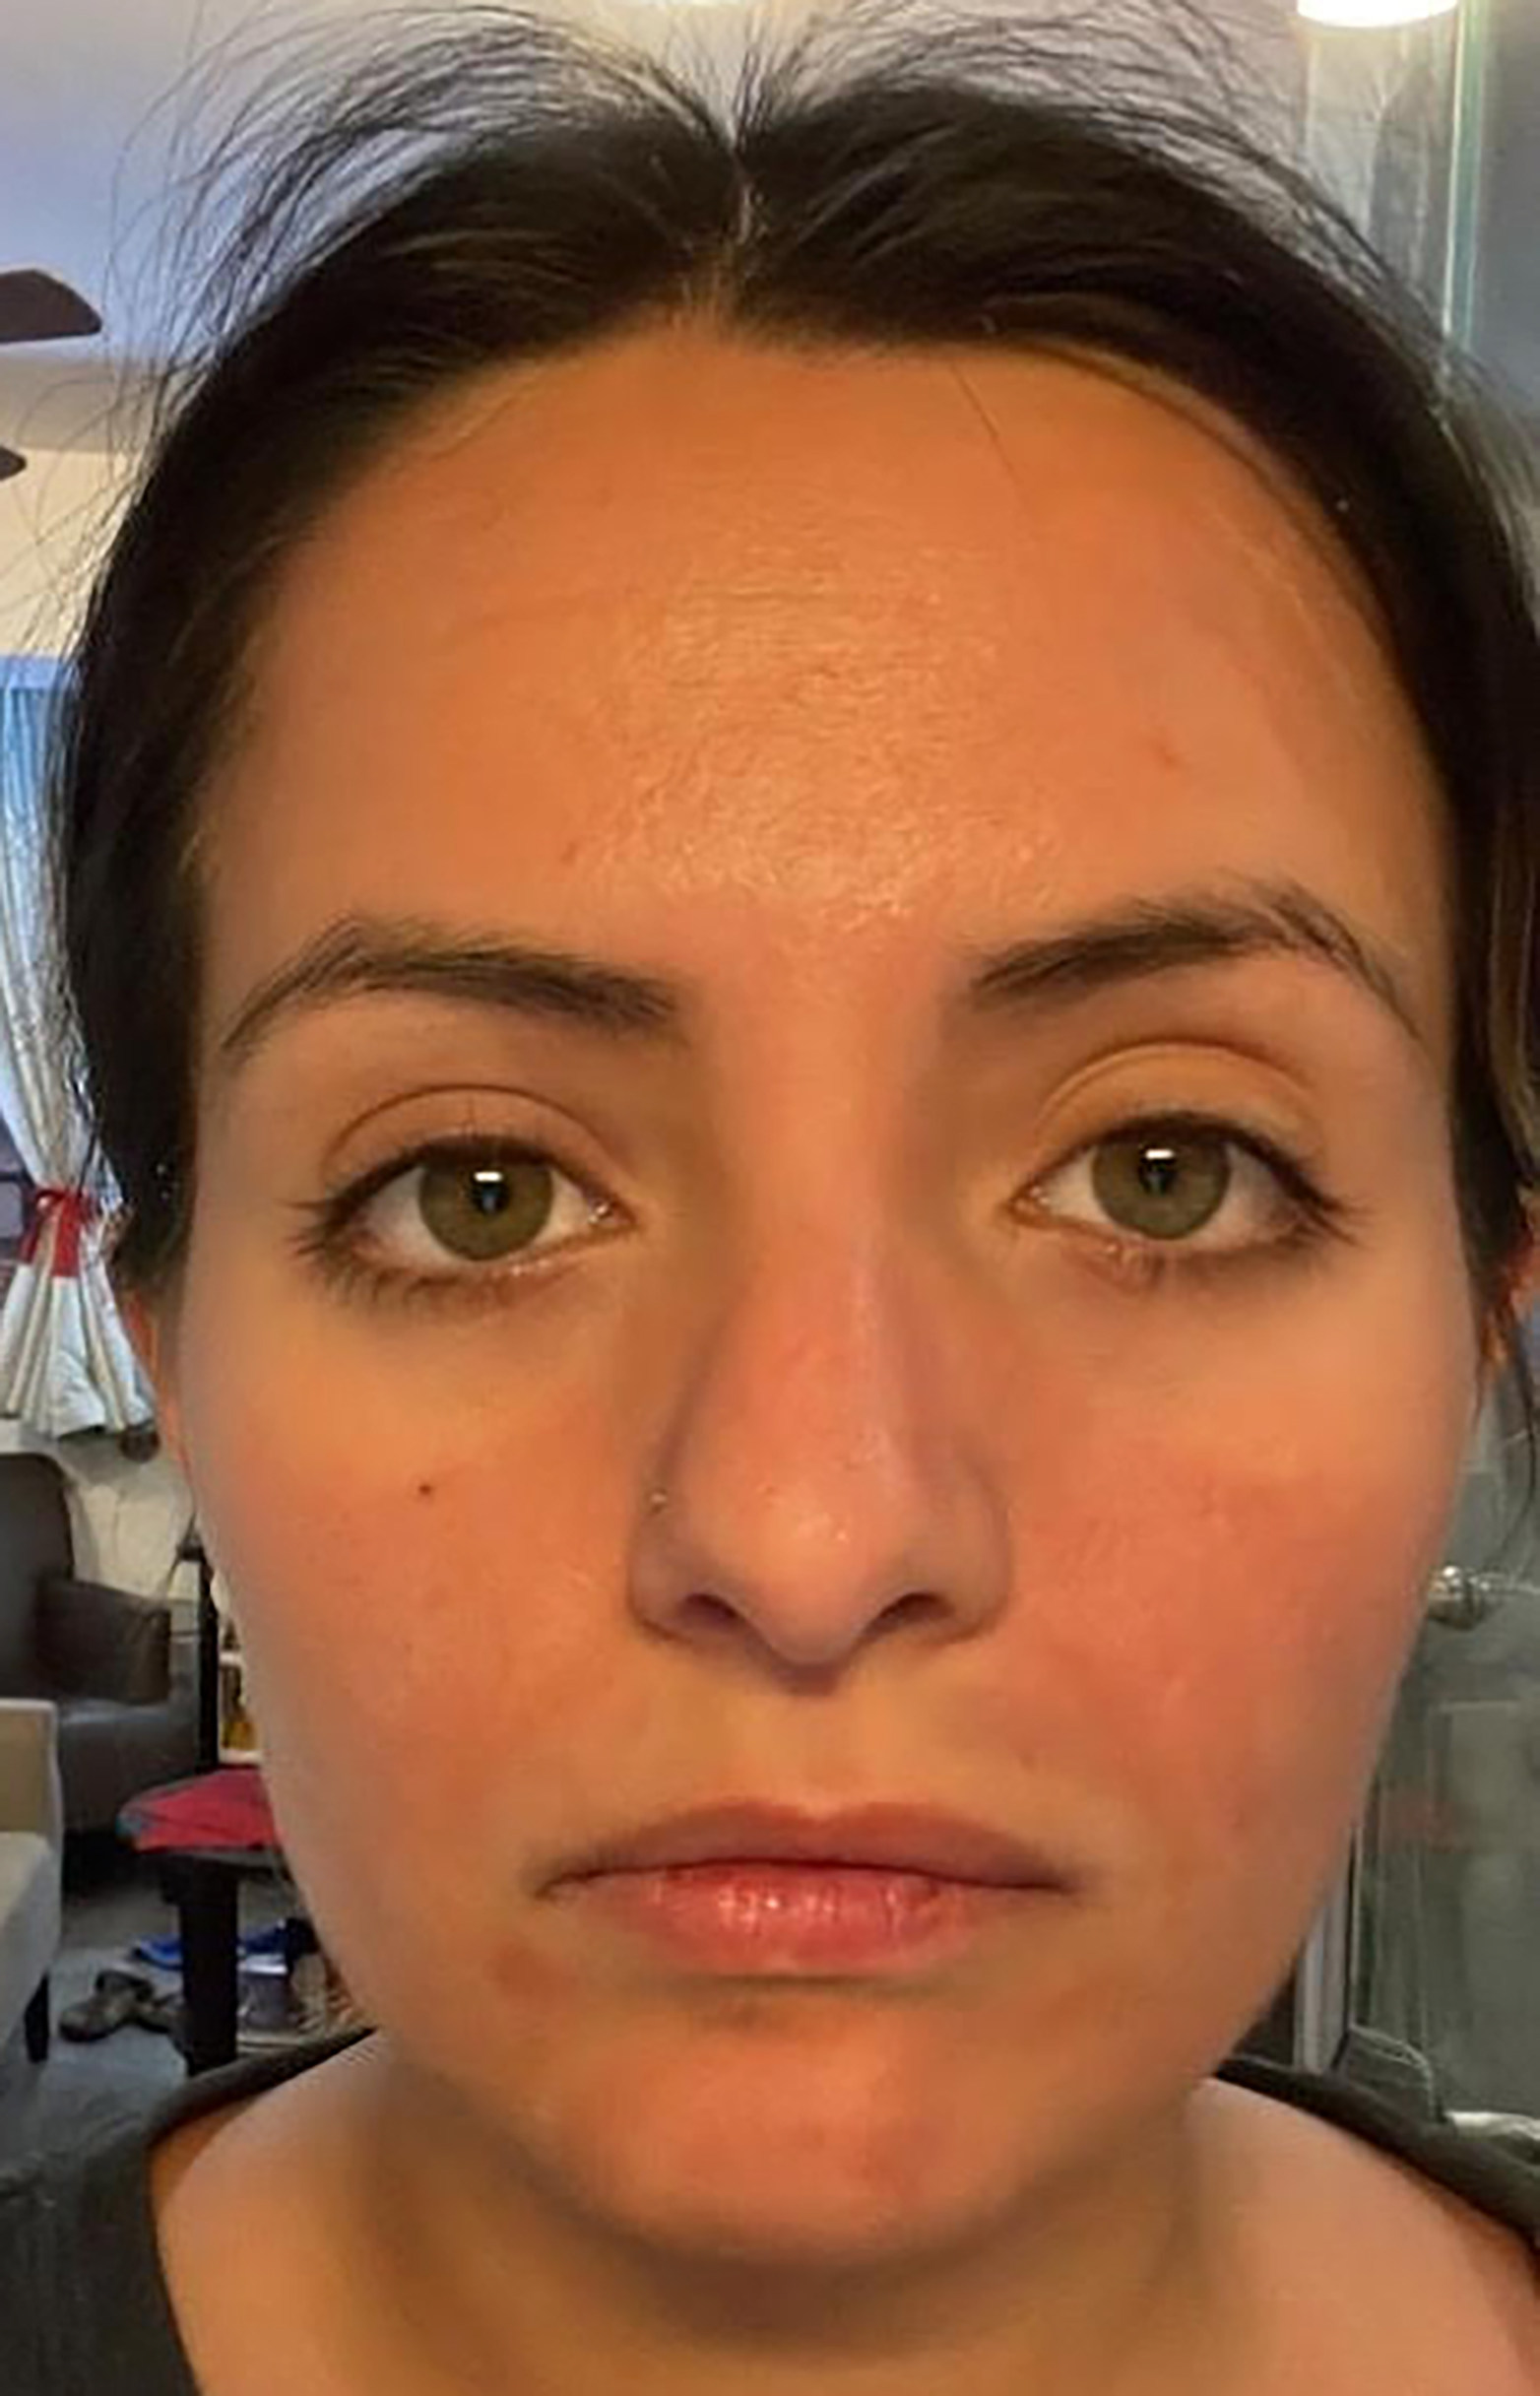 Sarah Vega’s face 8 days after her first Hong Kong microneedling experience. Redness and inflammation is supposed to subside within 24-48 hours. Photo: Sarah Vega